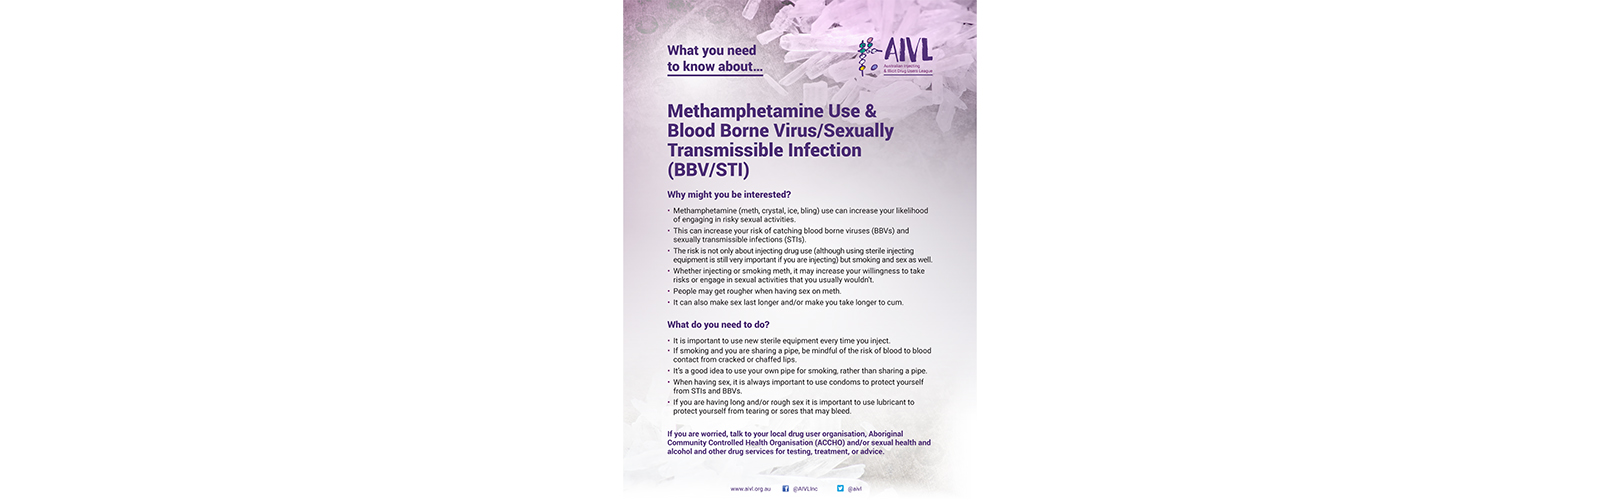 Featured image for “Methamphetamine use and Blood Borne Virus/Sexually Transmissible Infection (BBV/STI)”